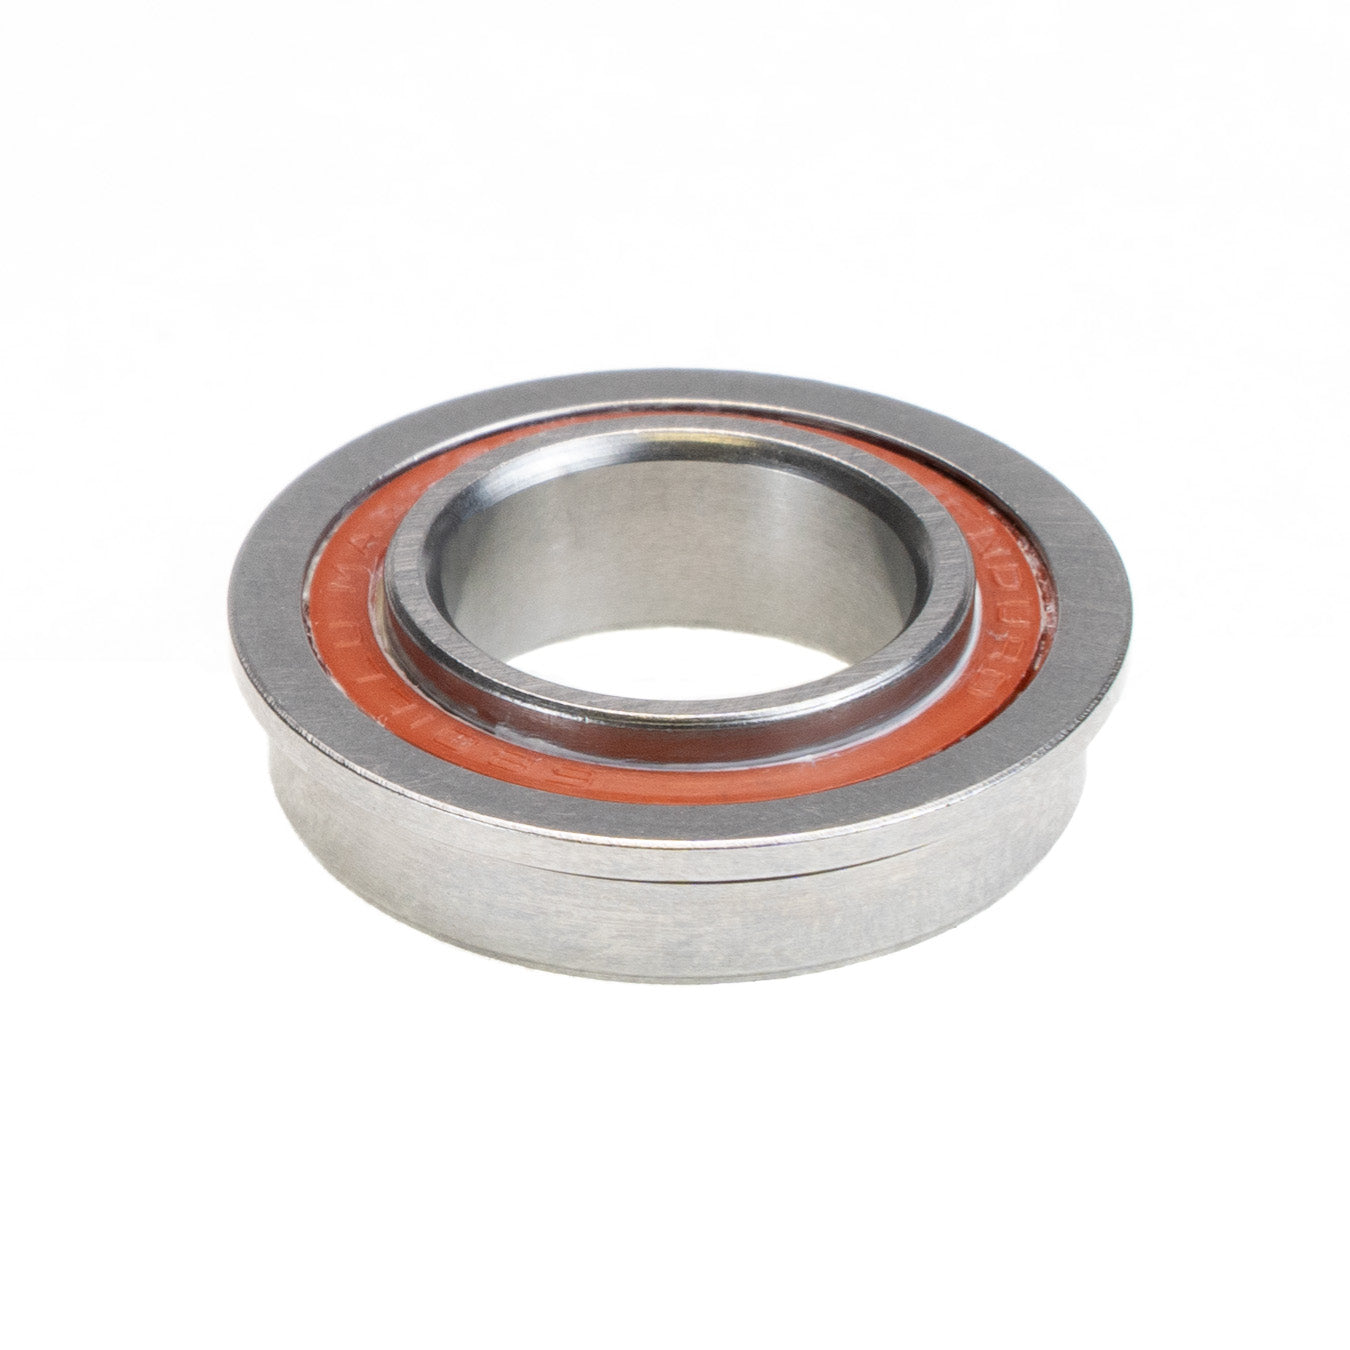 6801 LLU MAX FE - Flanged, Extended-Race, MAX-Design, ABEC-3, radial suspension bearing - 12mm x 21/23mm x 5/6mm